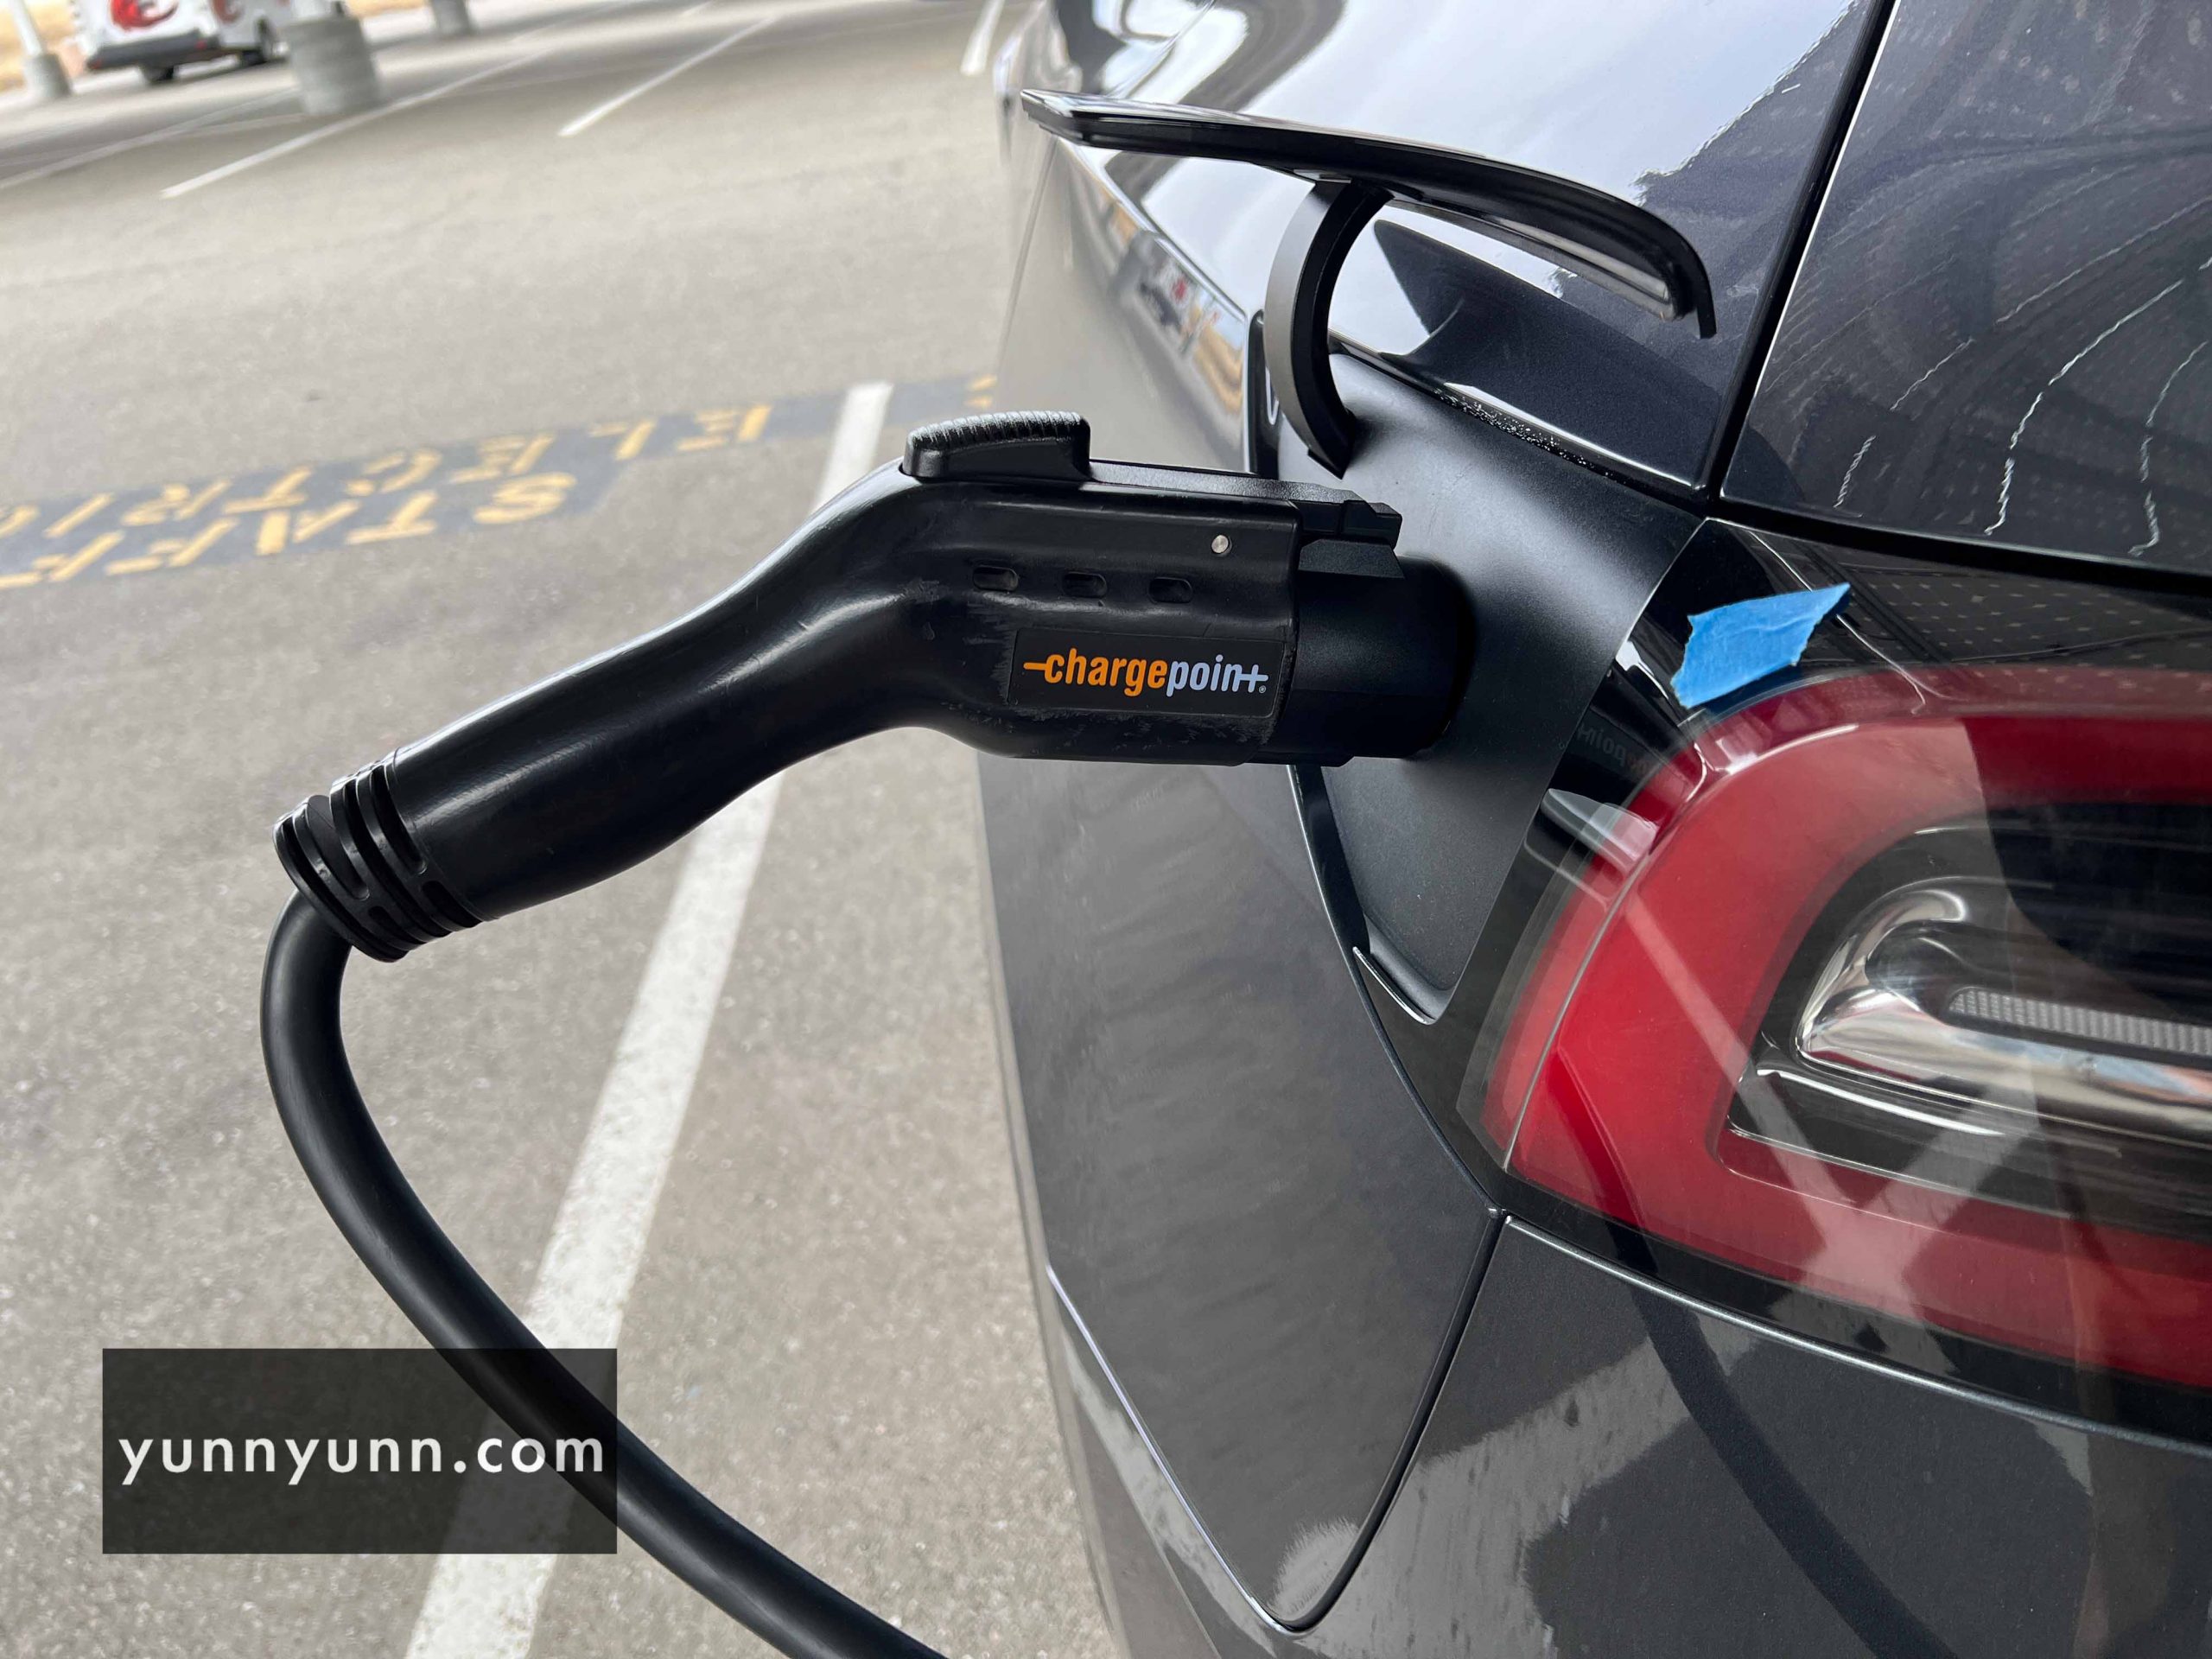 chargepoint